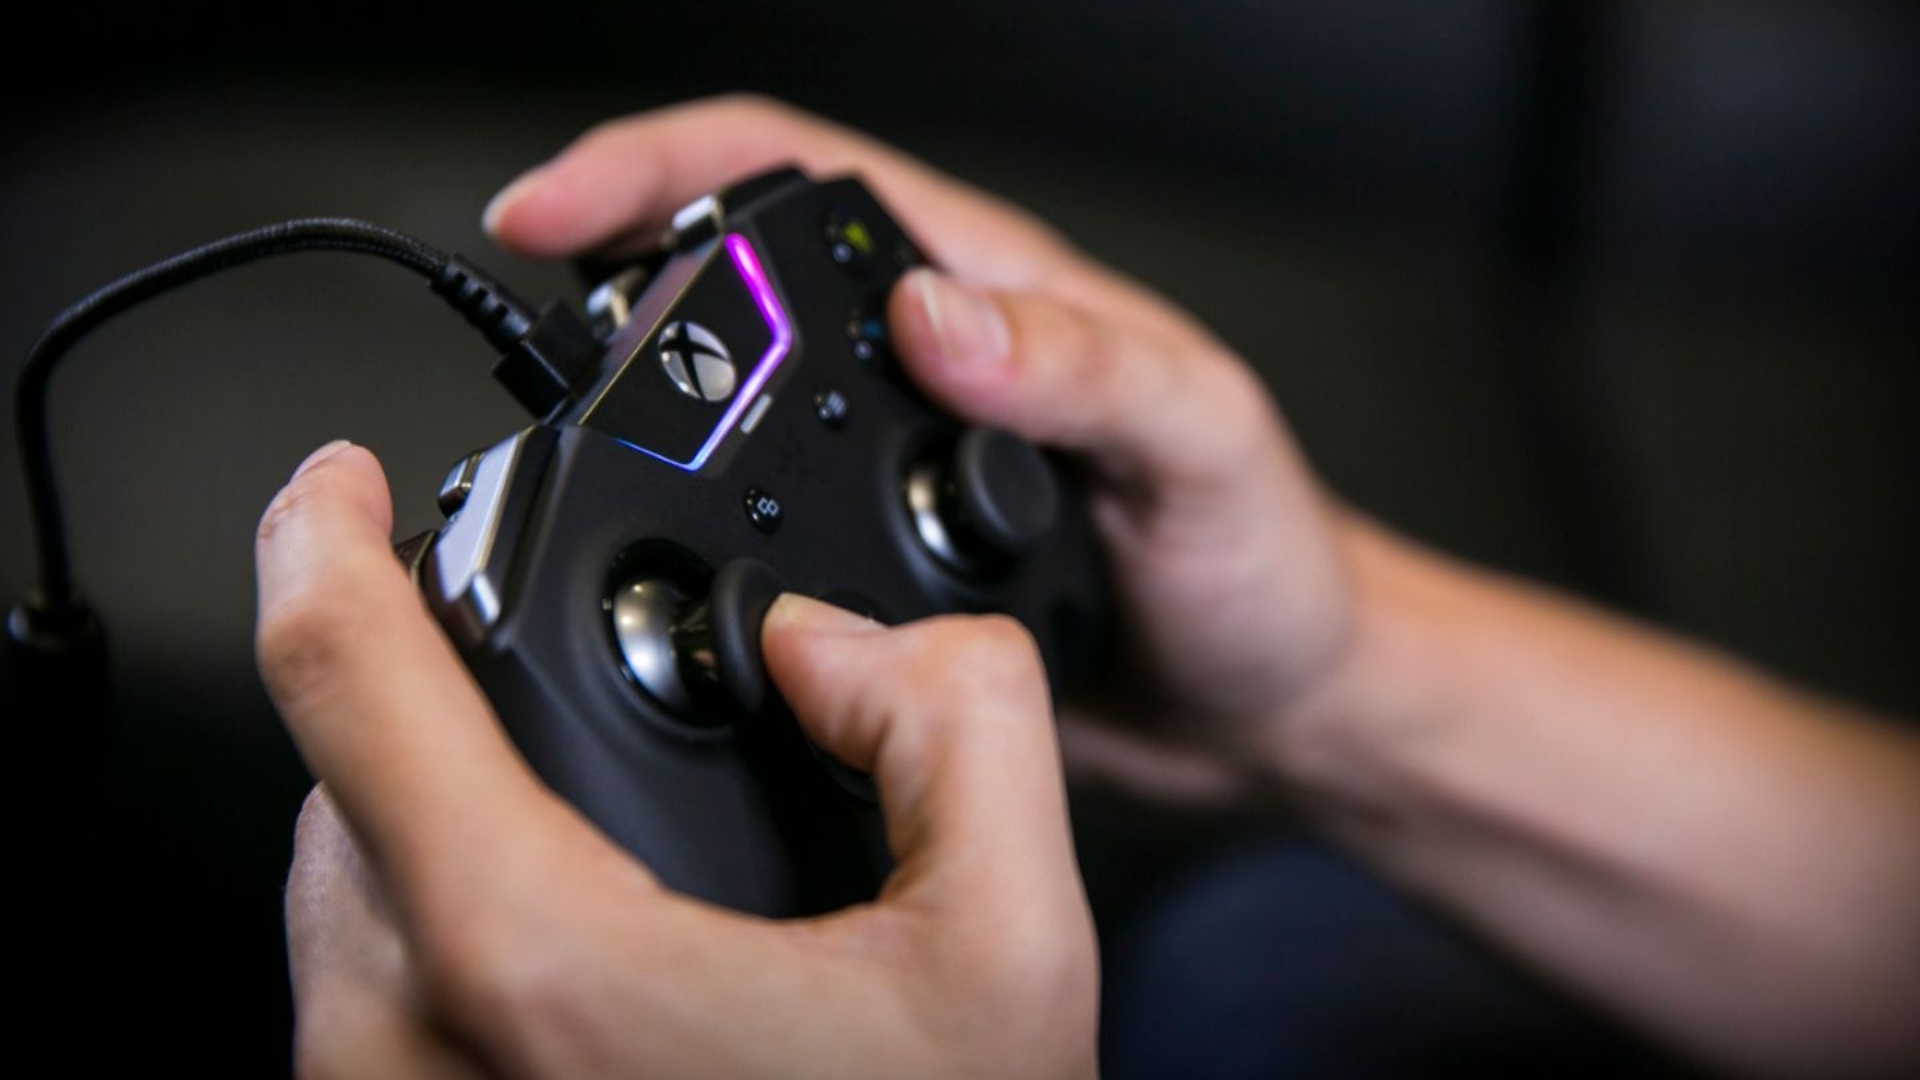 Listen up, bub – the Razer Wolverine Ultimate controller is $70 off on Best Buy